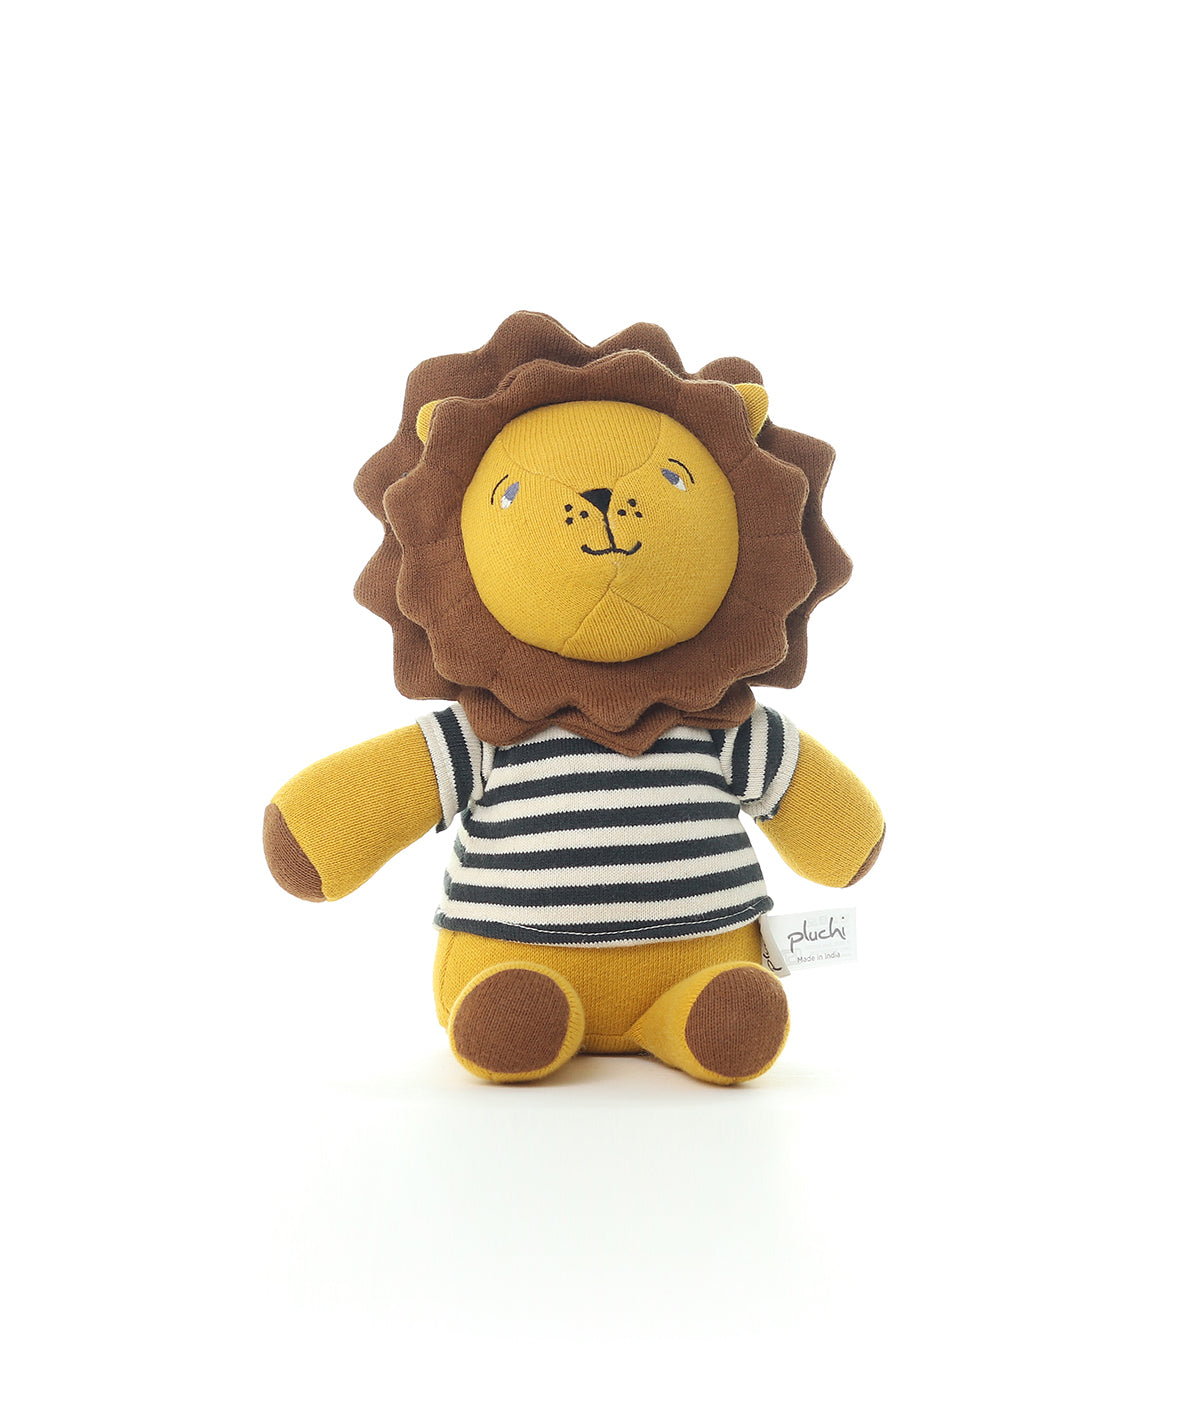 Jake the Lion Cotton Knitted Stuffed Soft Toy (Light Camel & Dull Copper Color)